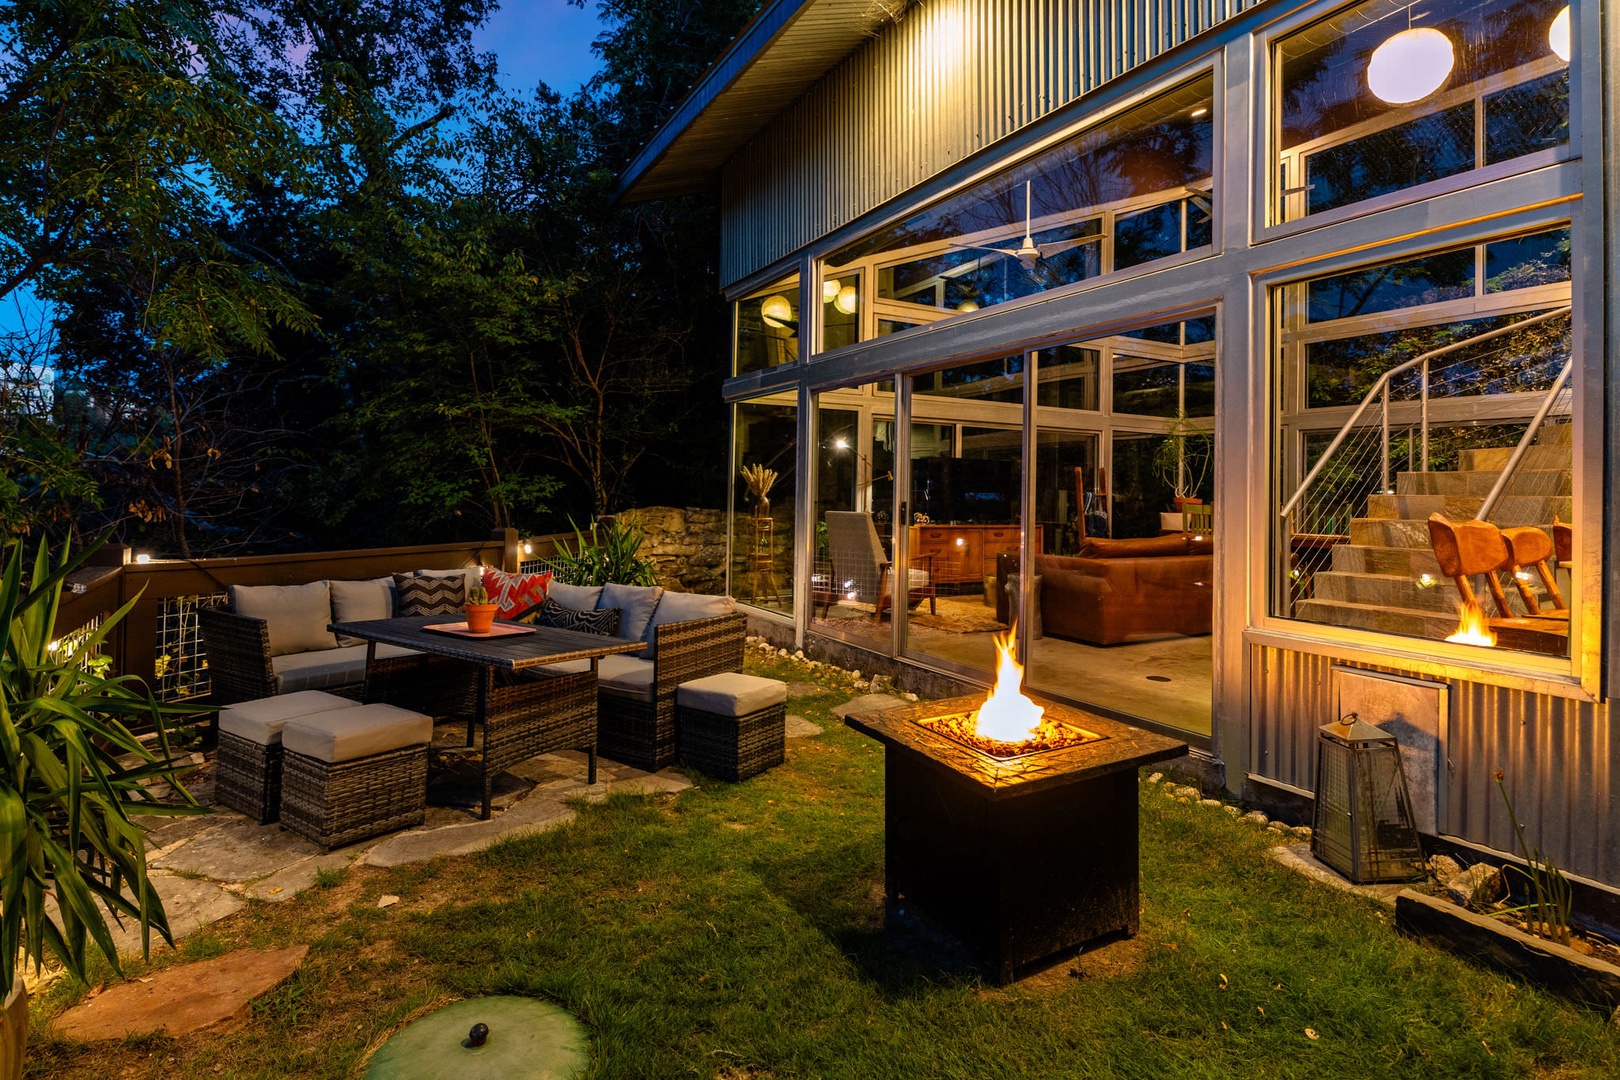 Large back deck with outdoor seating, fire pit and endless views